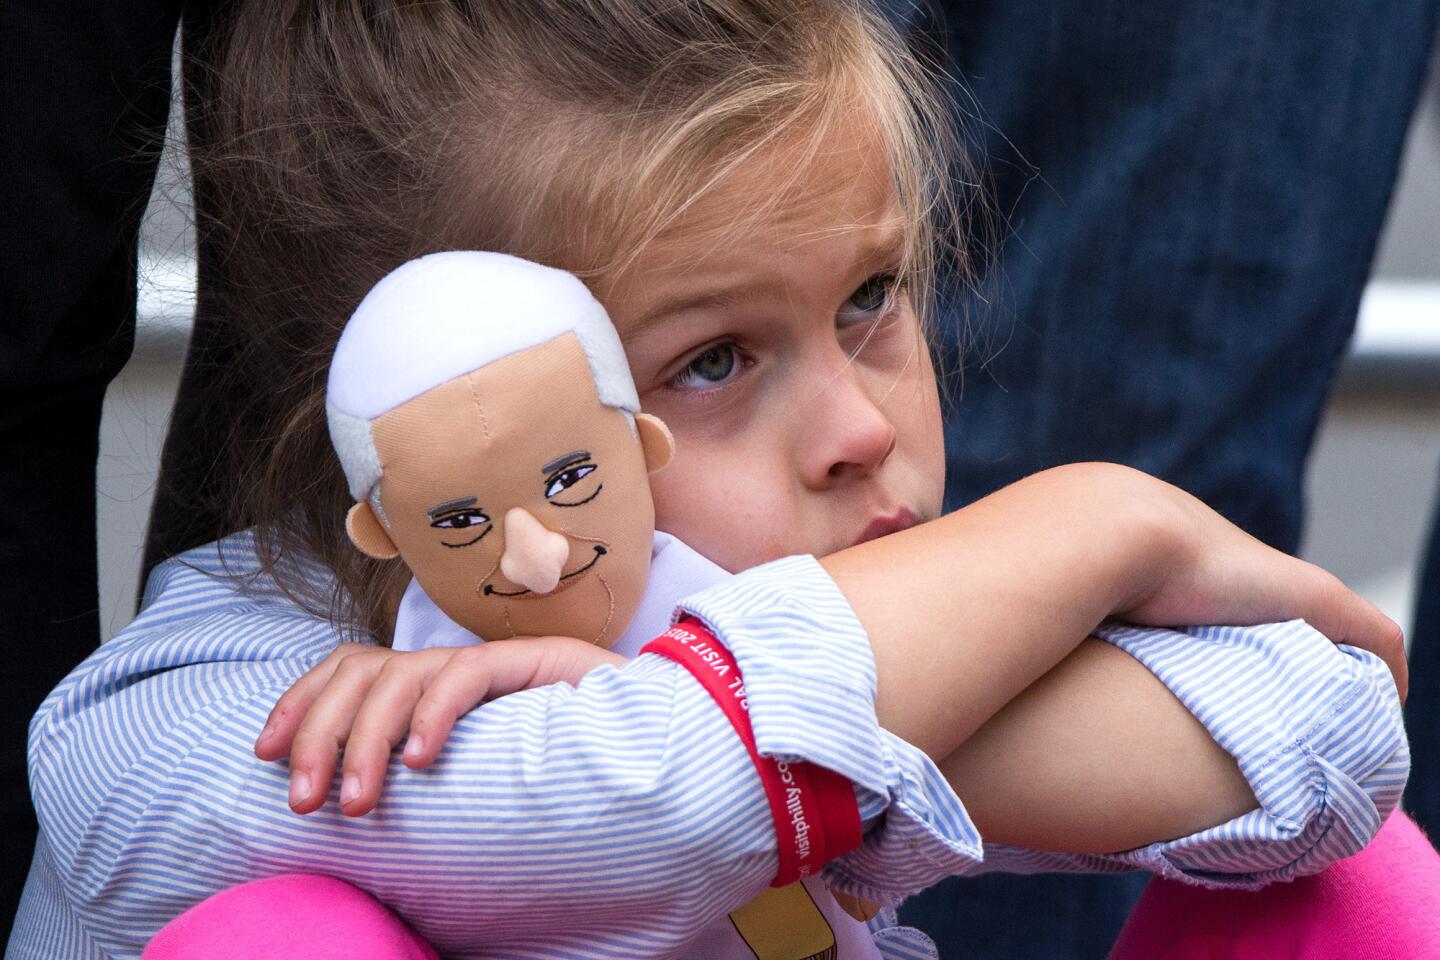 Seven-year-old Leyla Drees of Stewartville, Minn., clings to her Pope Francis doll while watching the pope's speech on immigration on a giant monitor at JFK Plaza in Philadelphia on Saturday, Sept. 26, 2015.